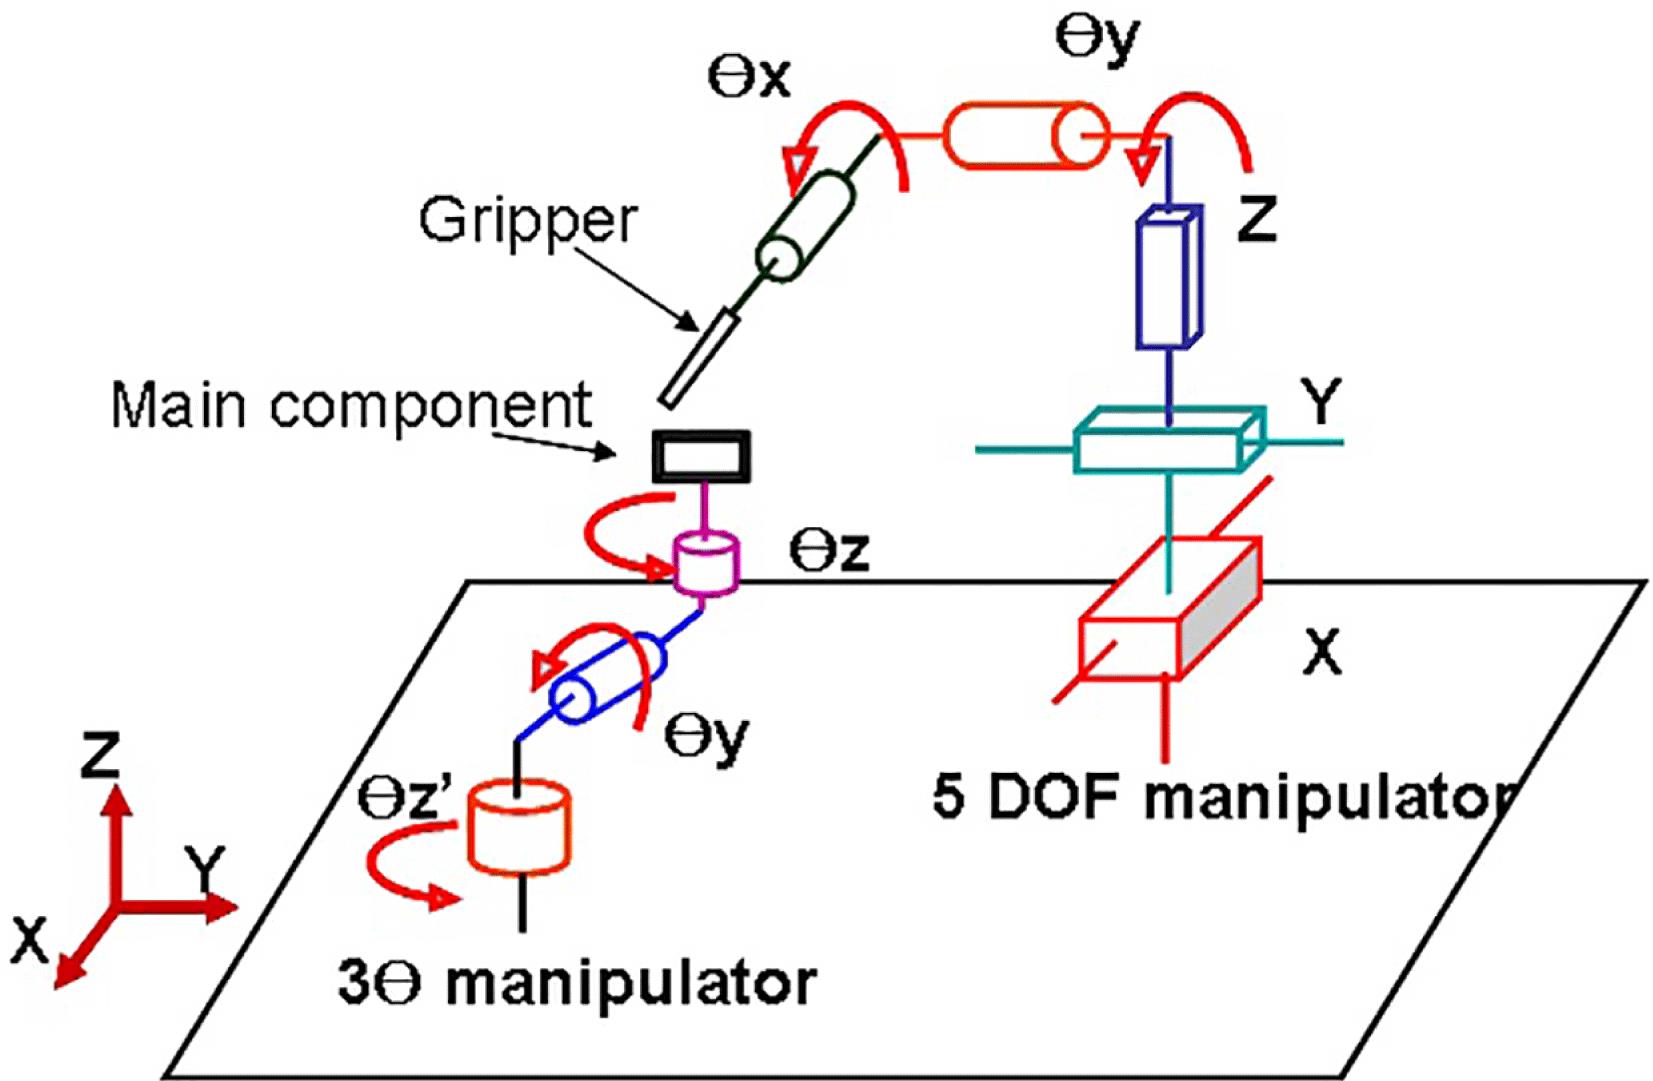 The mechanical structure of the micromanipulate system.